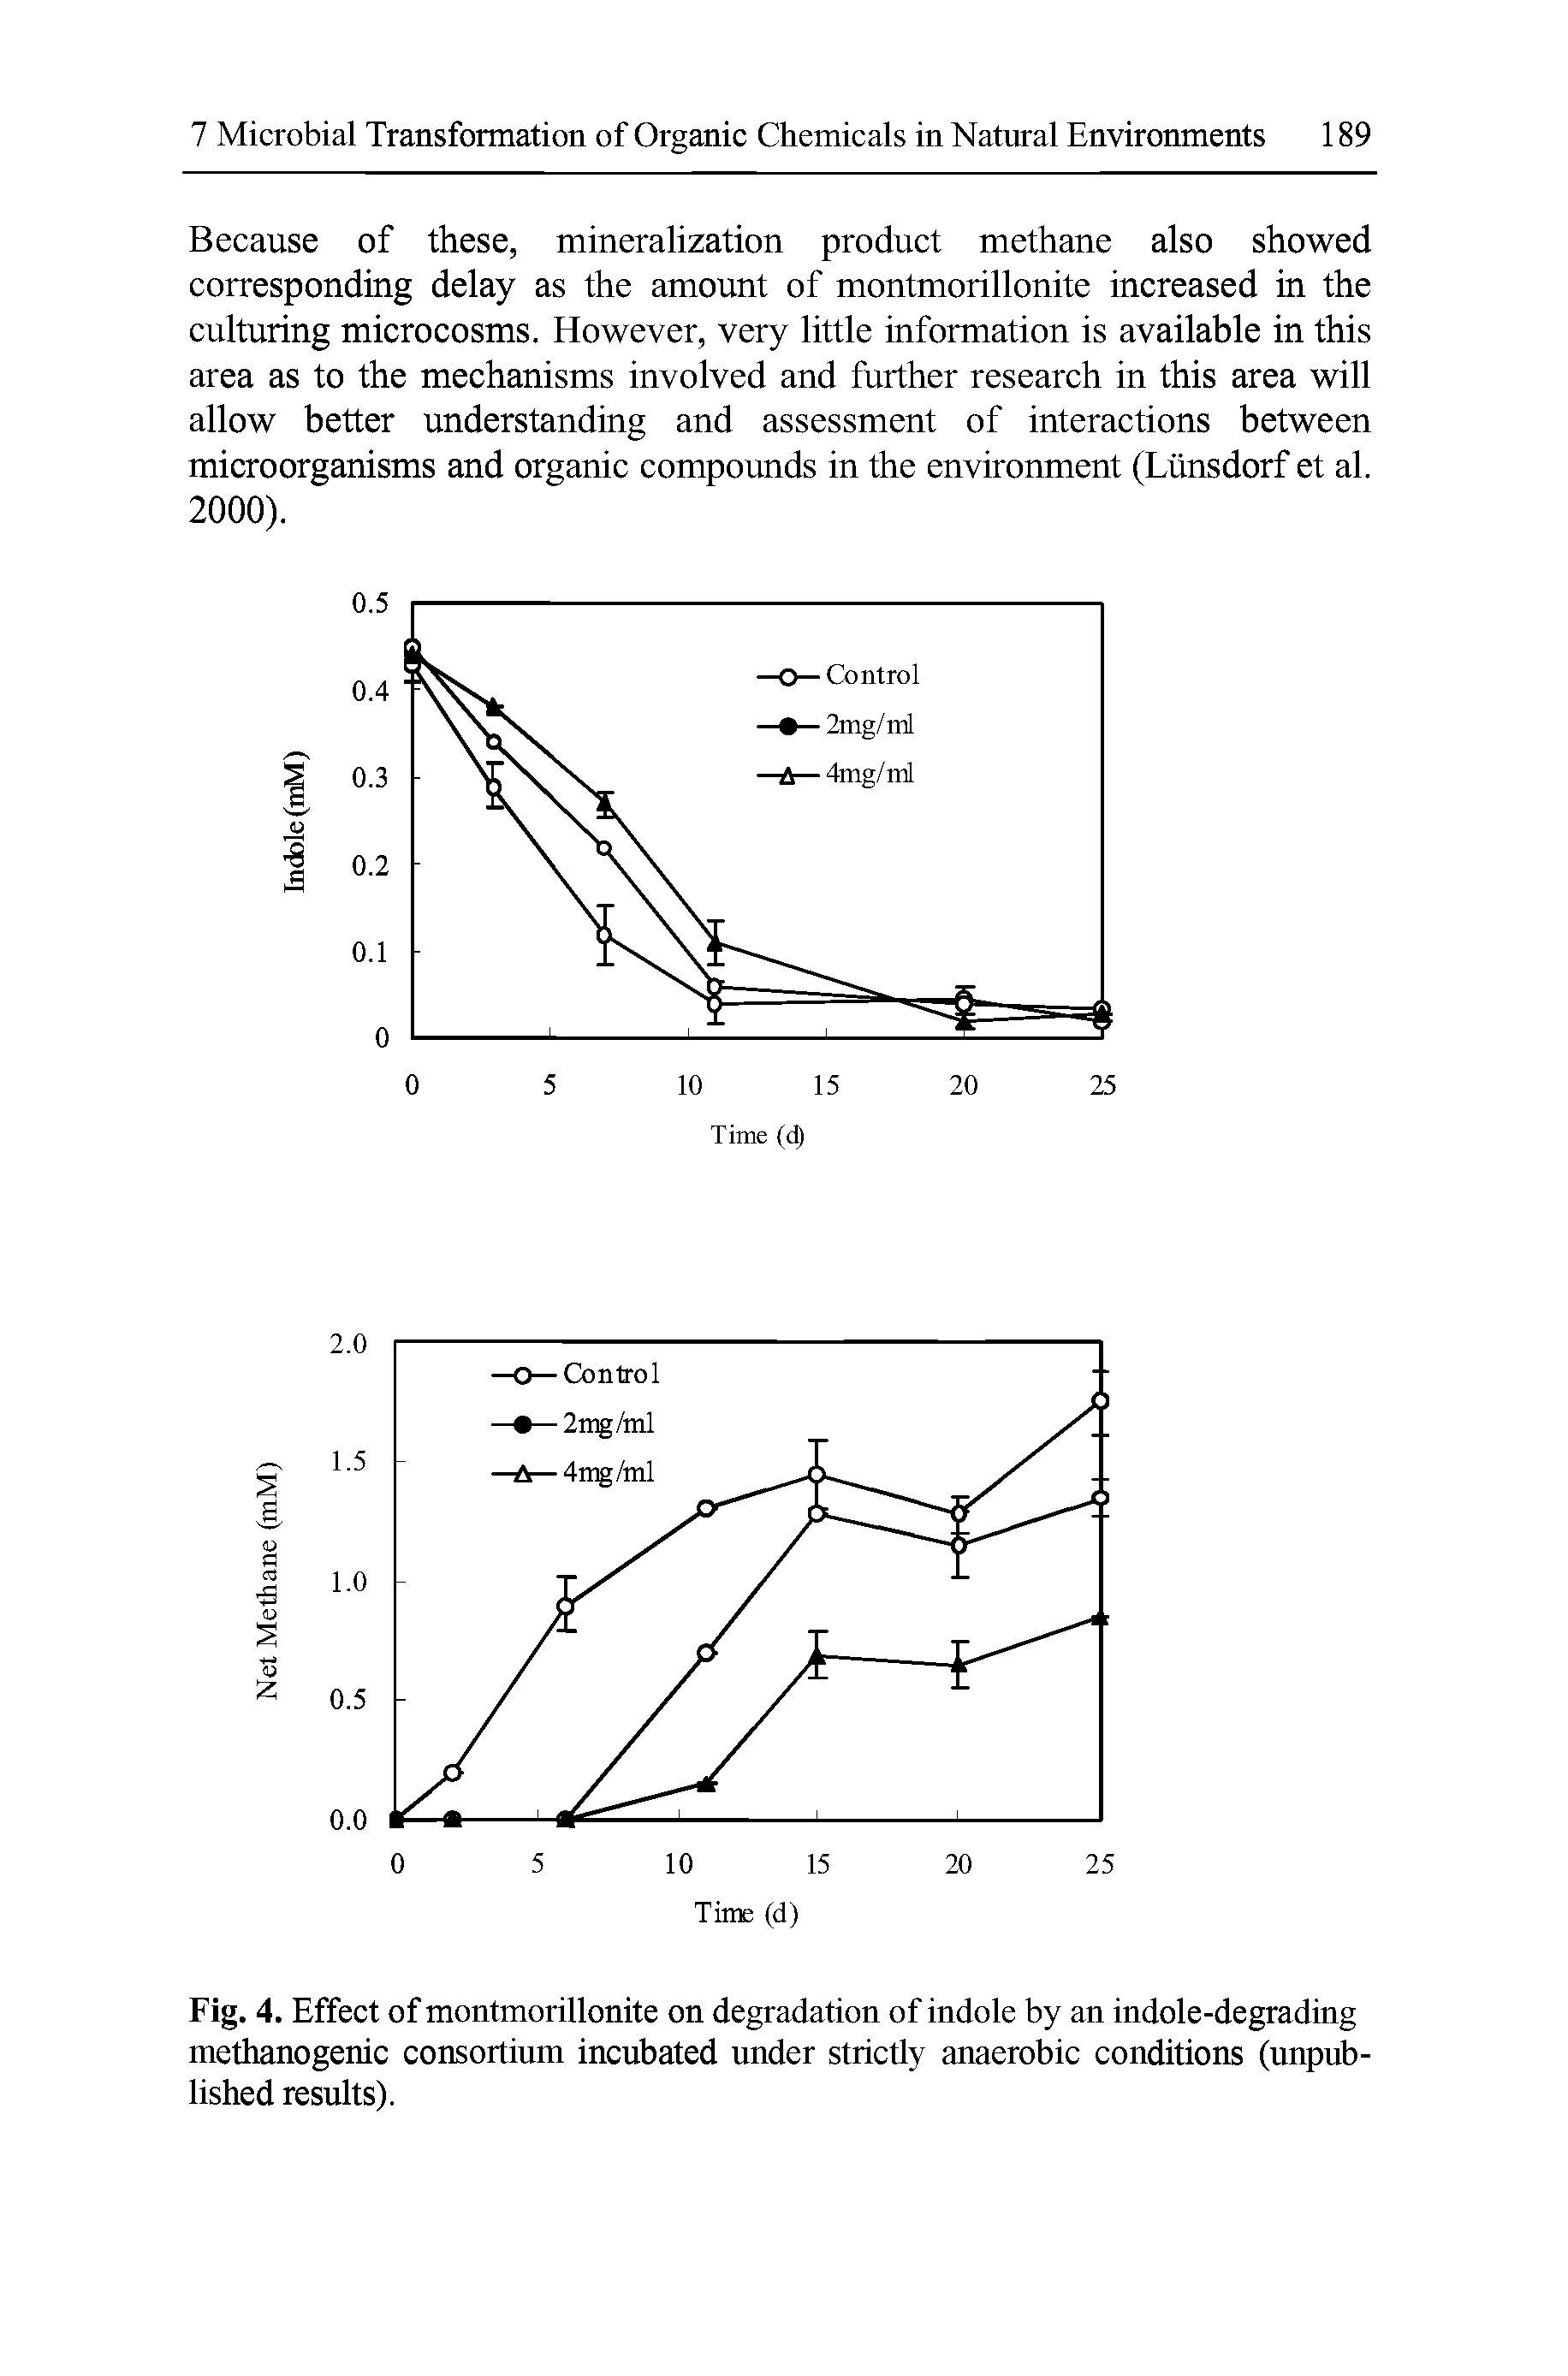 Fig. 4. Effect of montmorillonite on degradation of indole by an indole-degrading methanogenic consortium incubated under strictly anaerobic conditions (unpublished results).